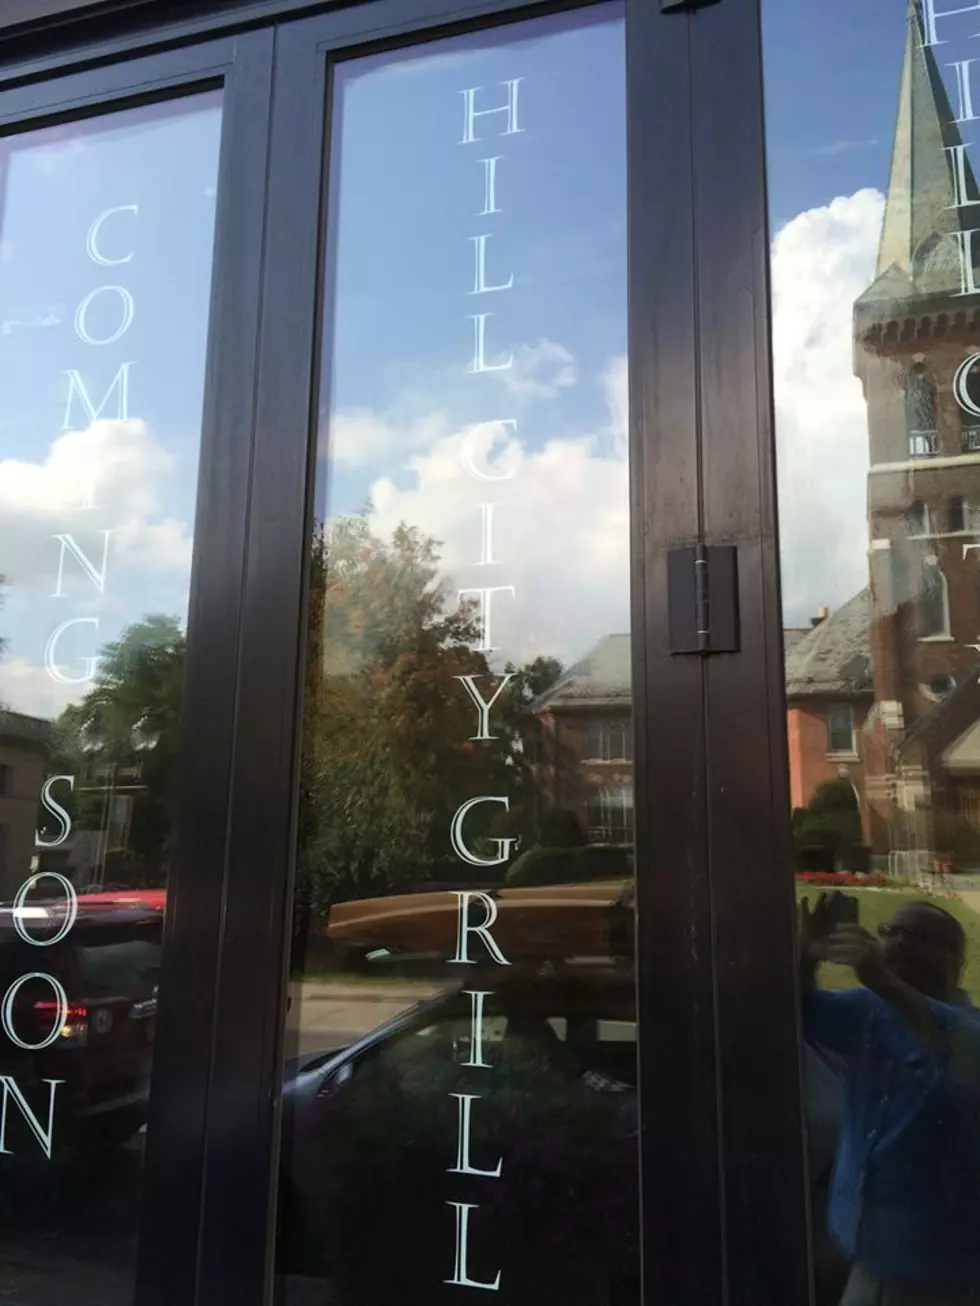 New Oneonta Restaurant To Open Soon:  “Hill City Grill”